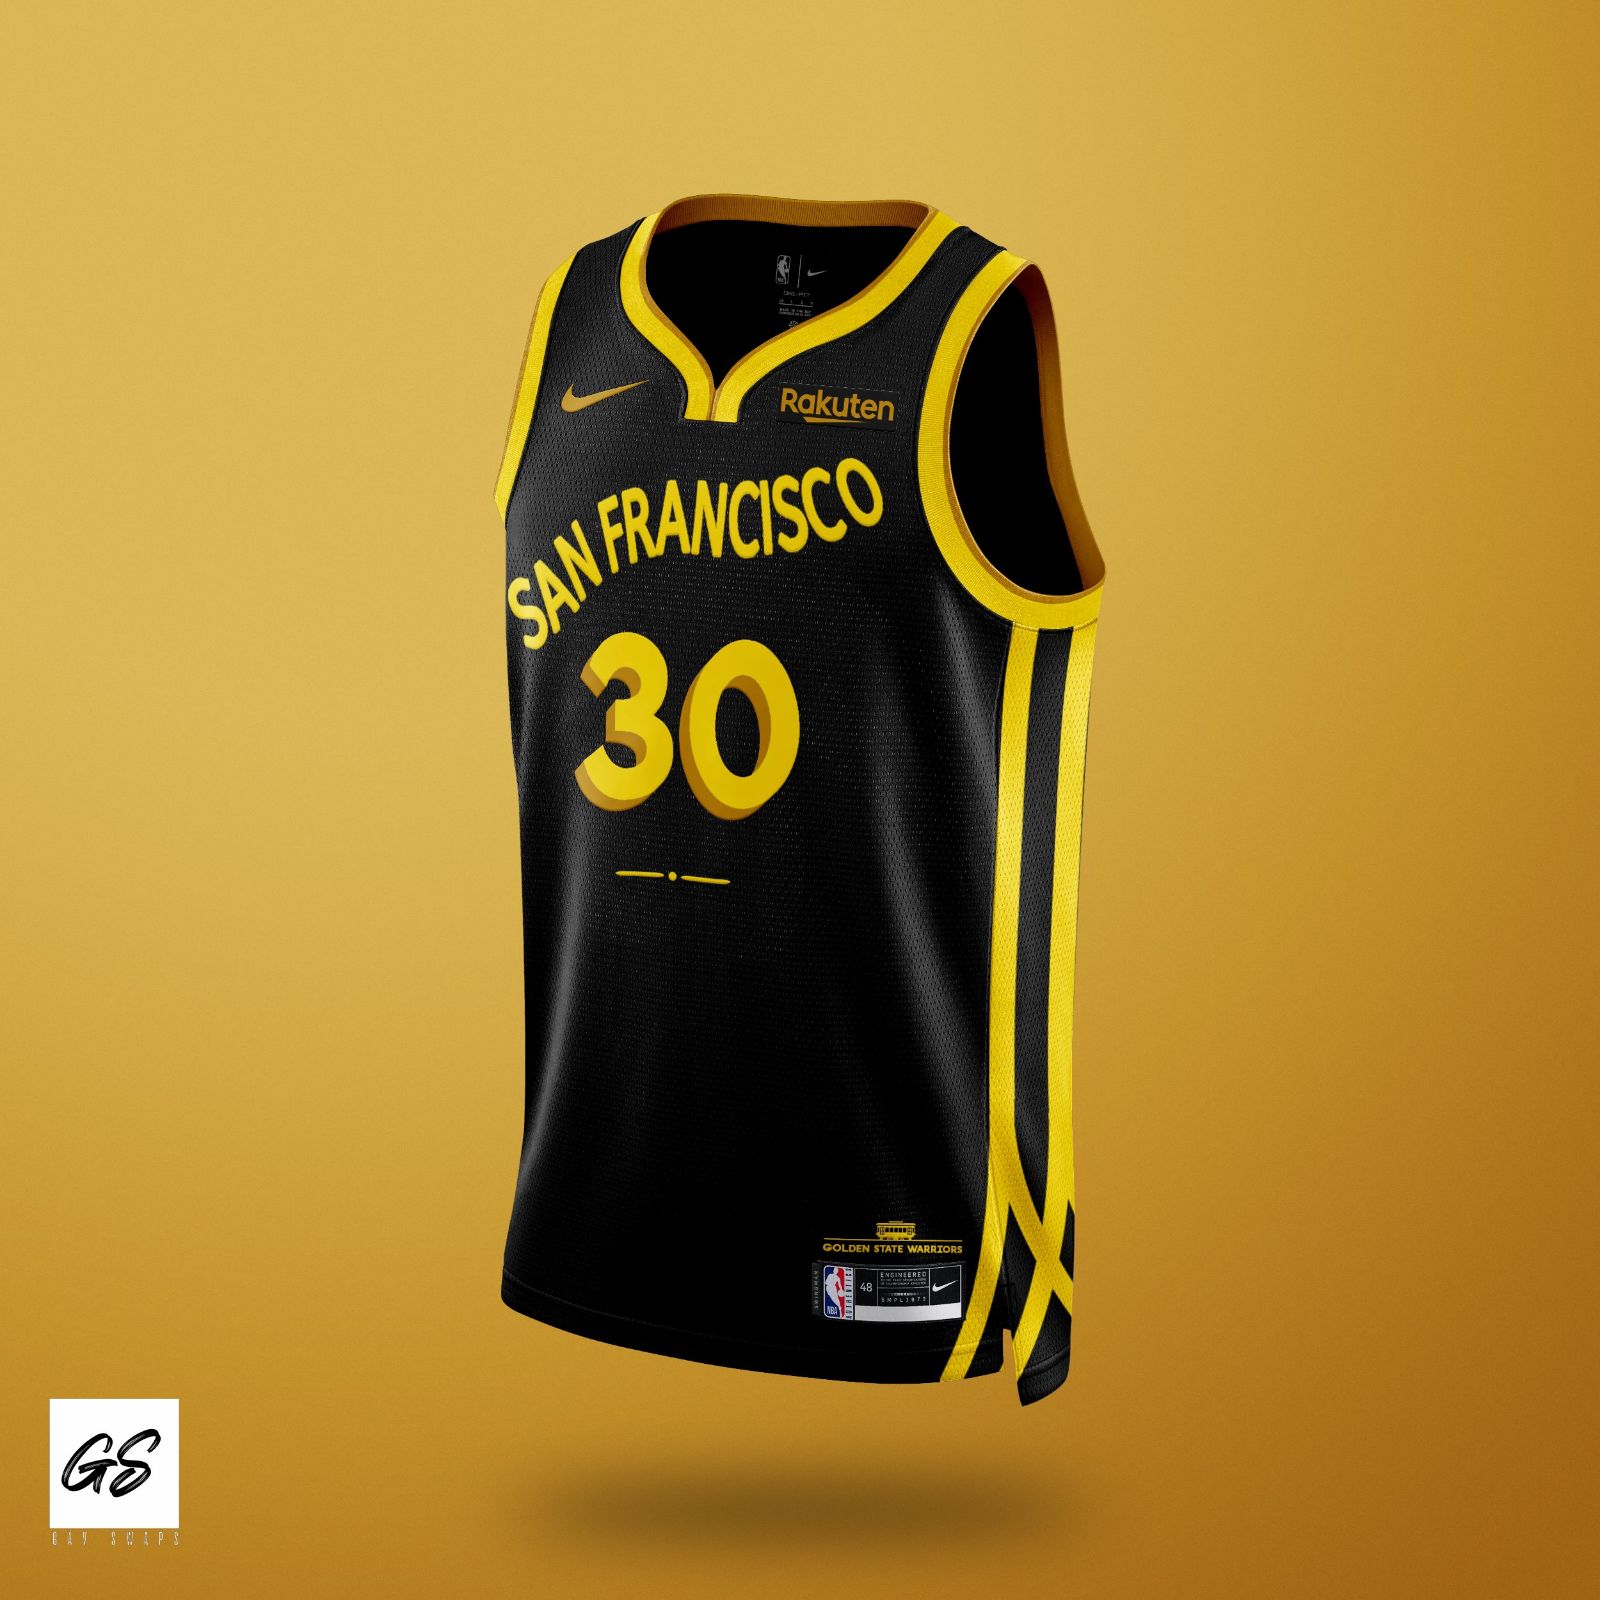 Gav Swaps on X: UPDATED: Golden State Warriors Leaked City Edition 2022 -  My best attempt at recreating the apparent leak of the Warriors city jersey  this upcoming season. Apologies for imperfections. @